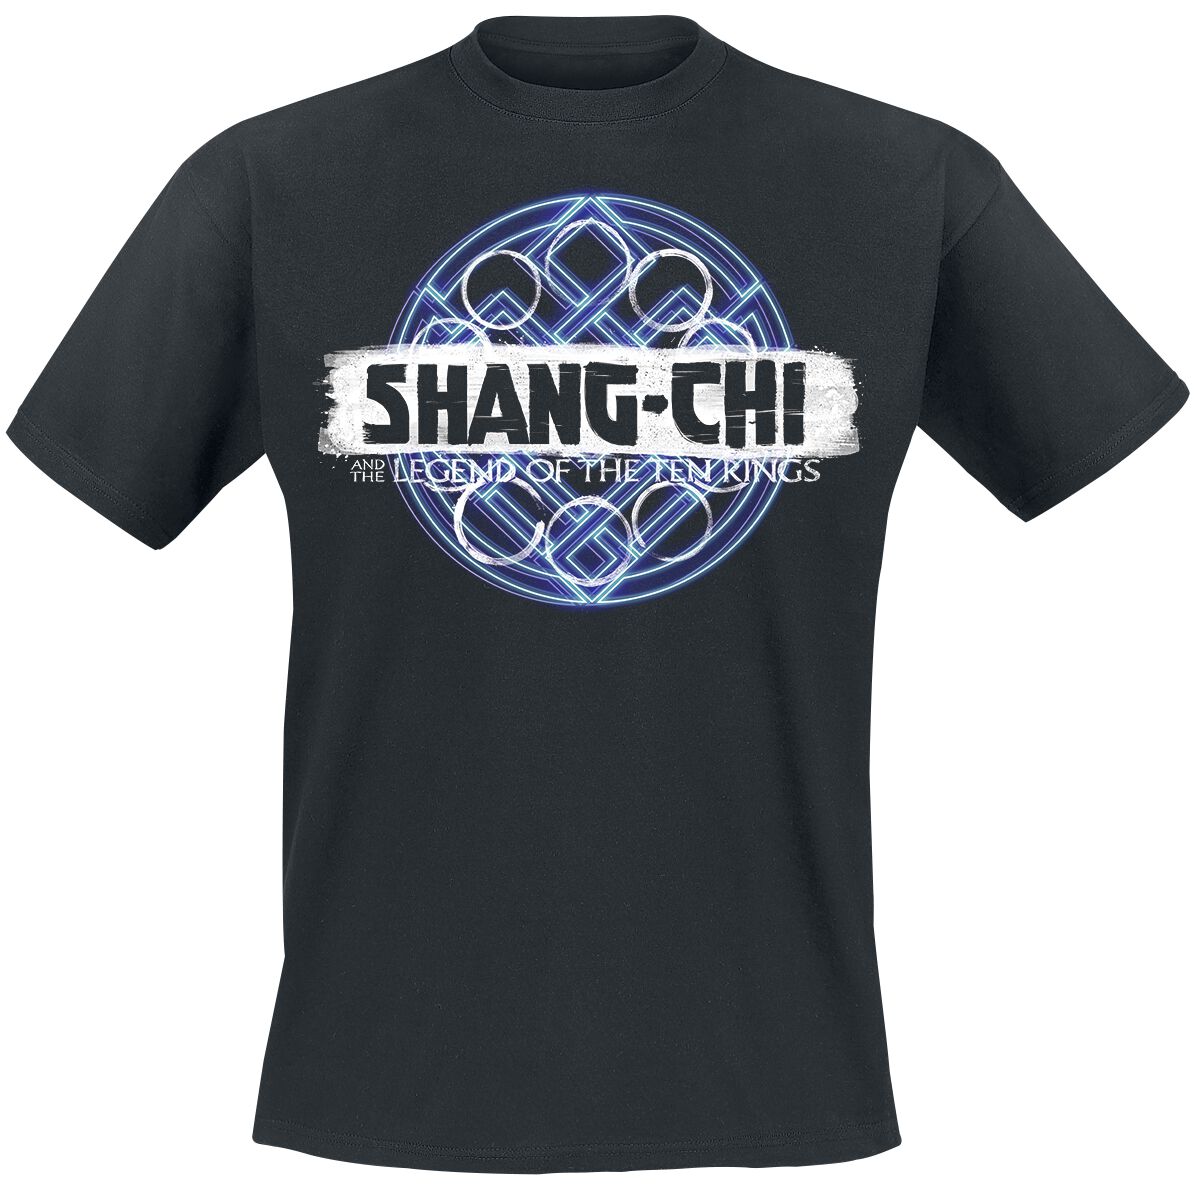 Shang-Chi and the Legend of the Ten Rings Neon T-Shirt black